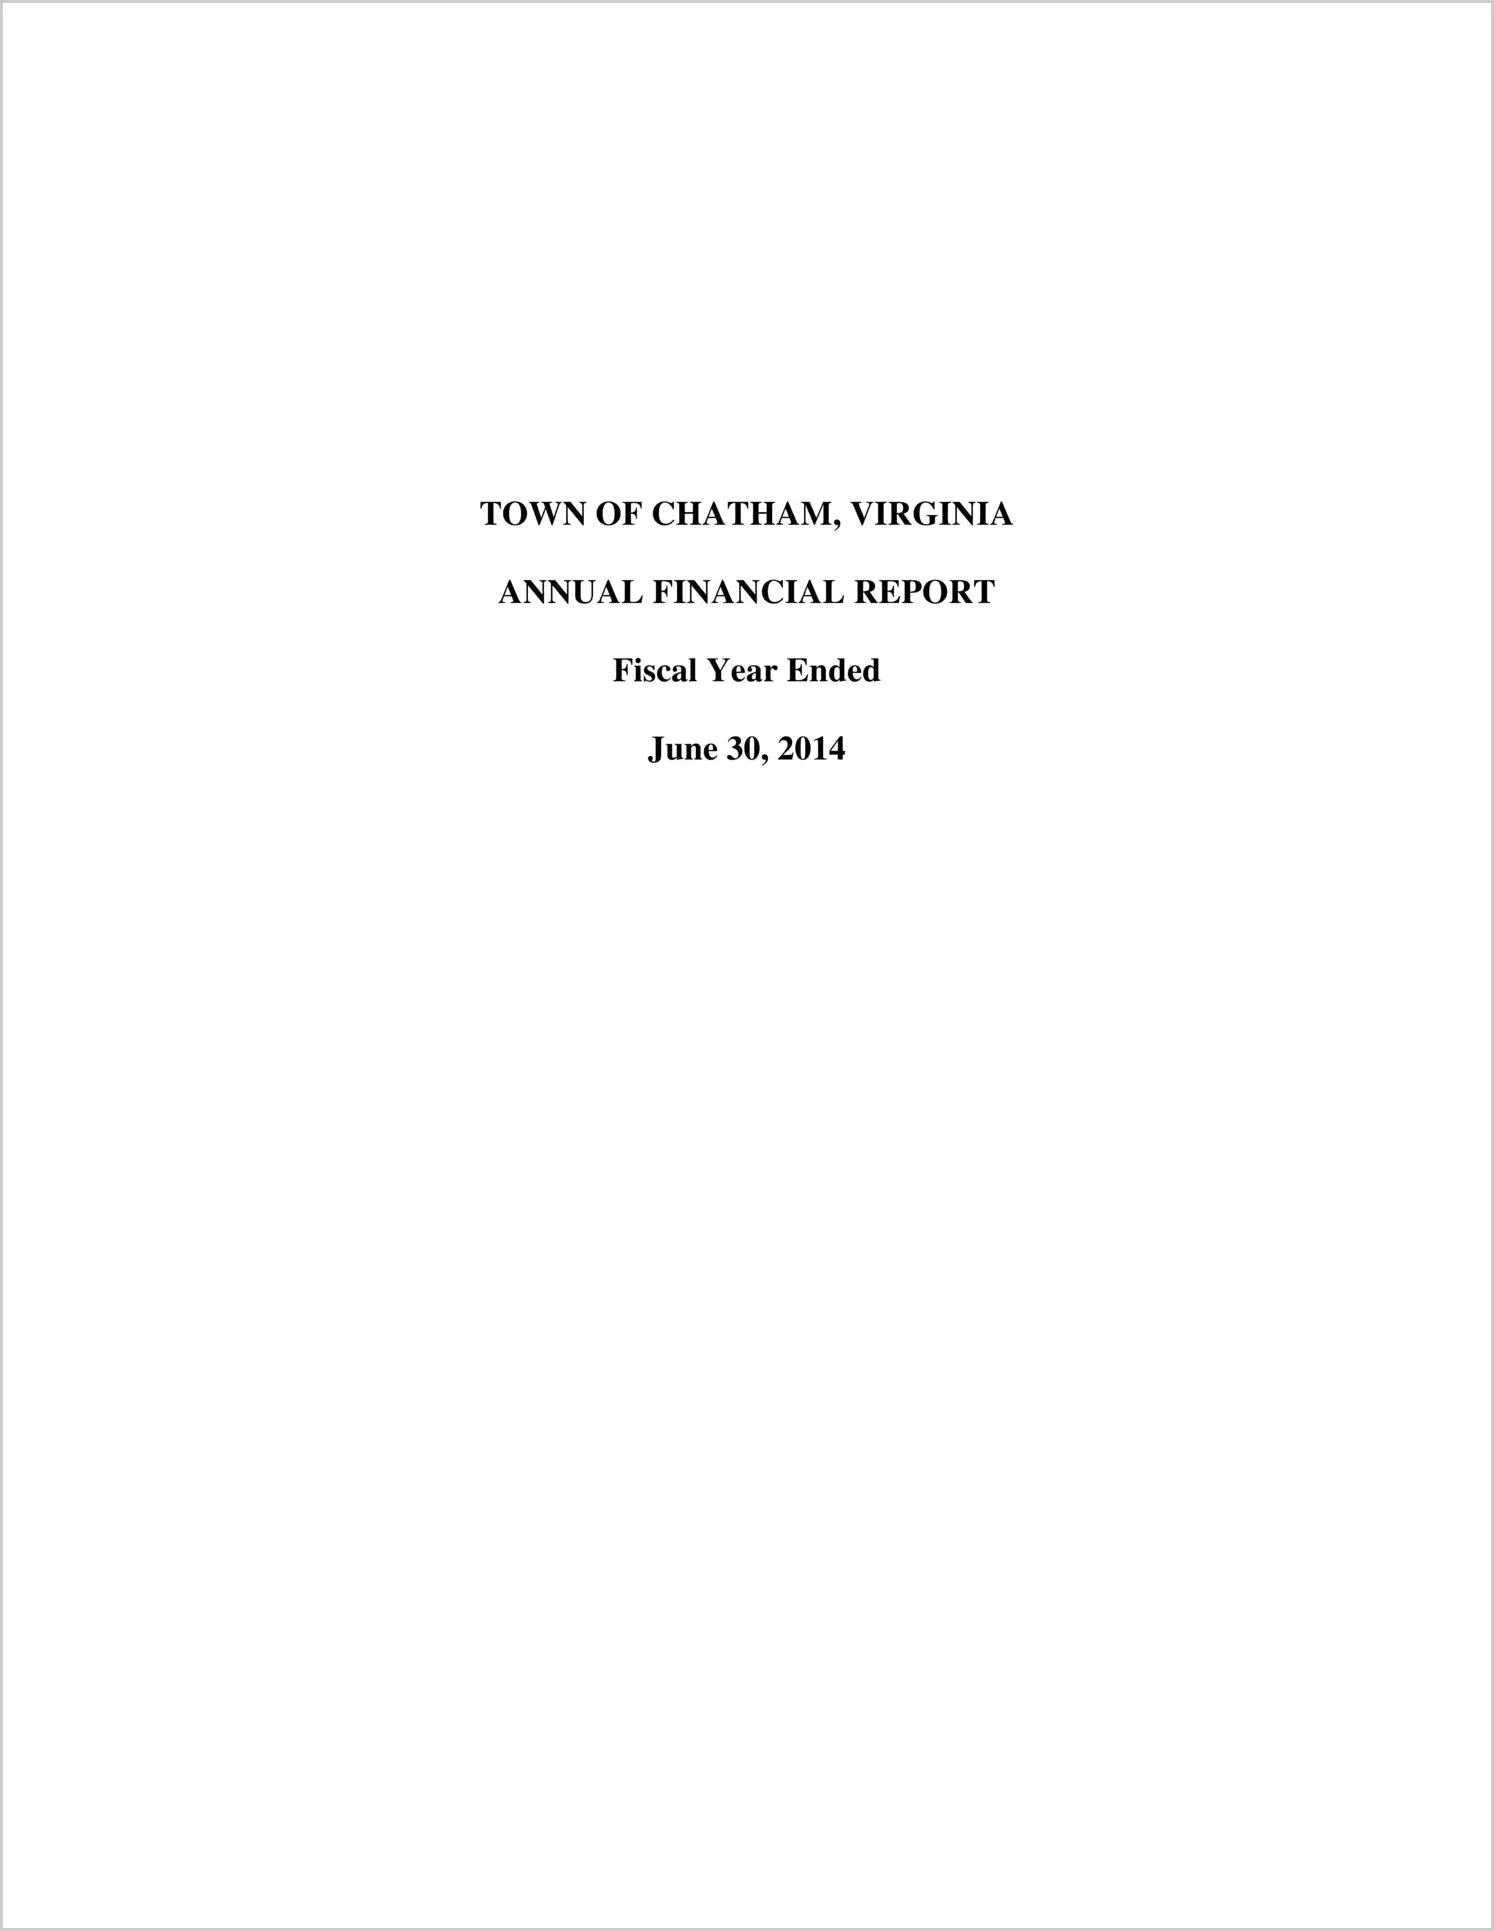 2014 Annual Financial Report for Town of Chatham